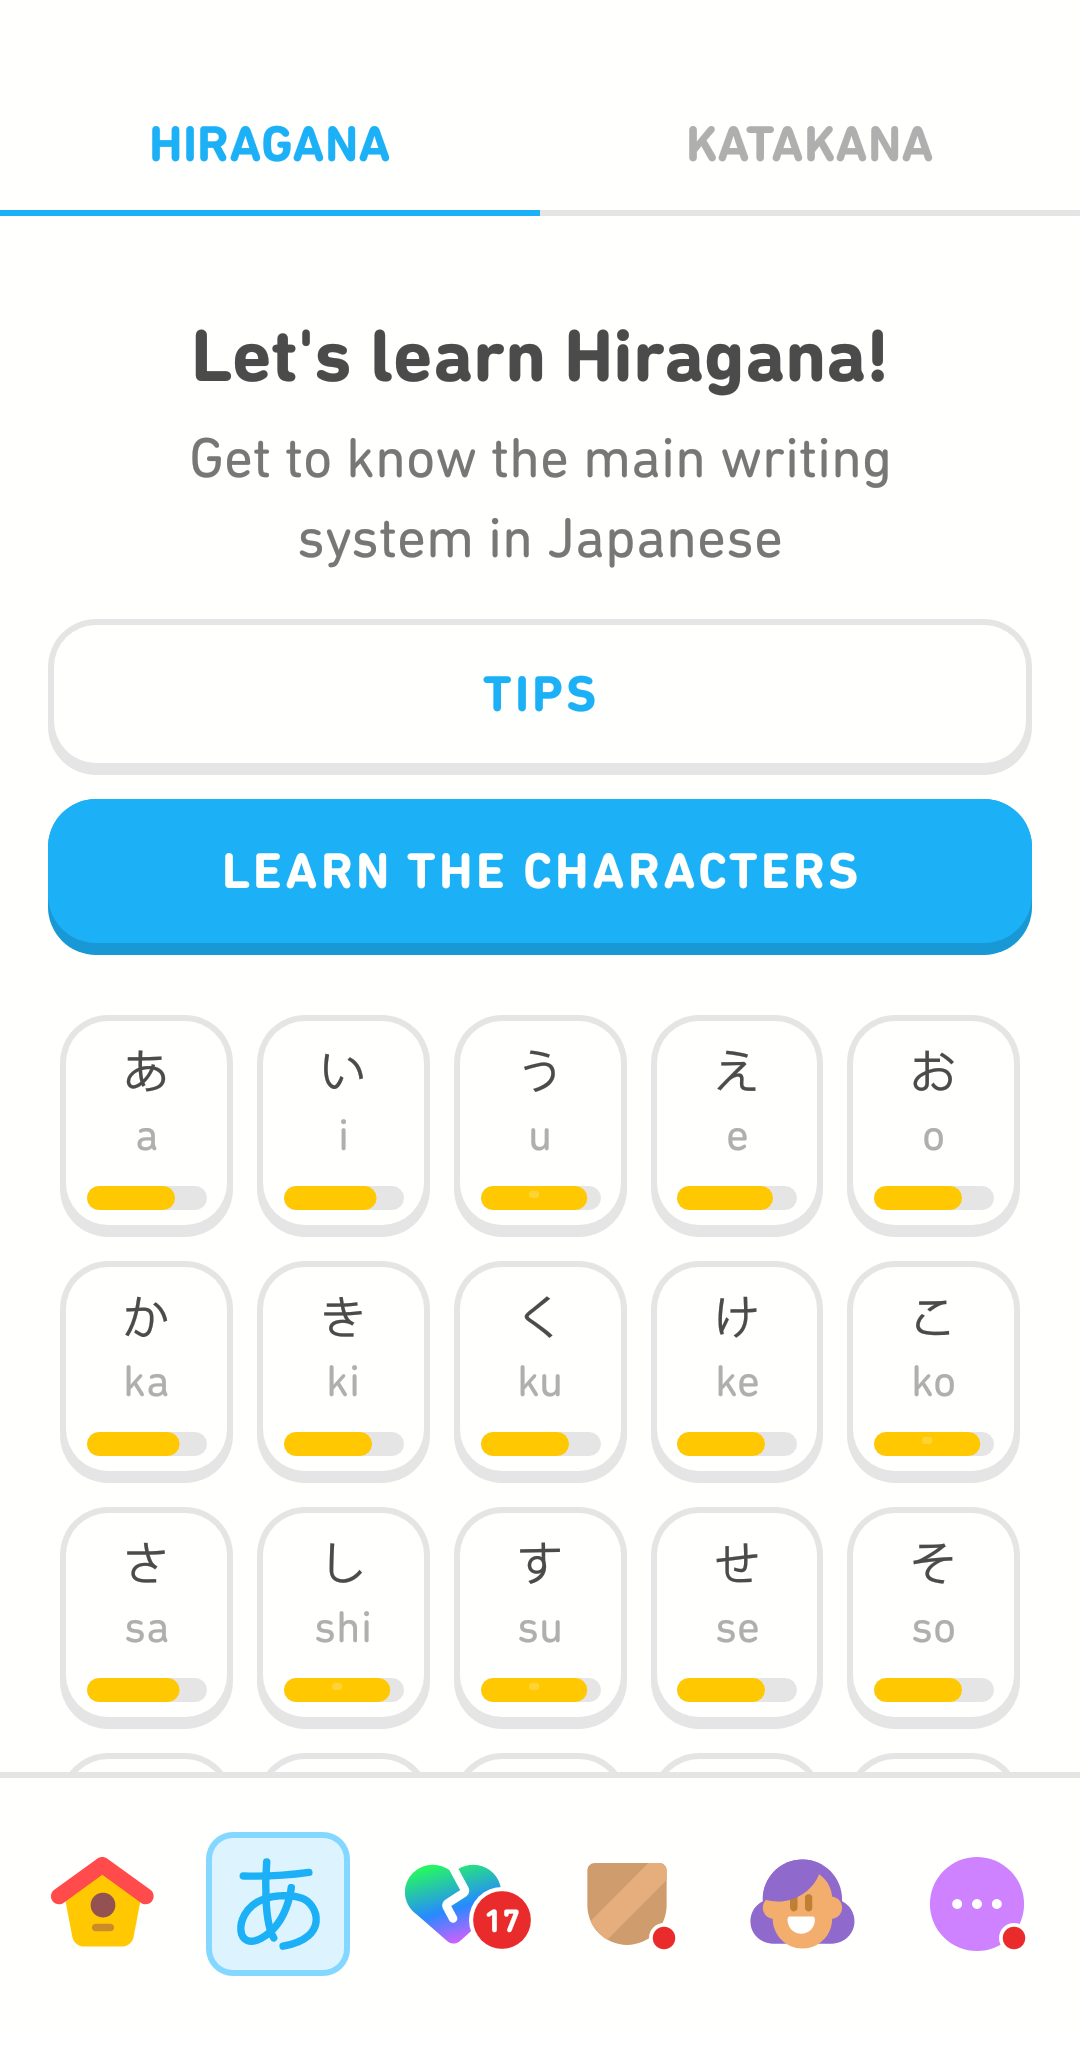 Screenshot of the practice tab. At the top it says "Let's practice Hiragana! Get to know the main writing system of Japanese" and below it are buttons for "Tips" and "Learn the characters." Most of the screen is a 5 x 3 row of "tiles" of the different hiragana characters and a Roman letter representing the sound they make. The tiles continue if you scroll down.